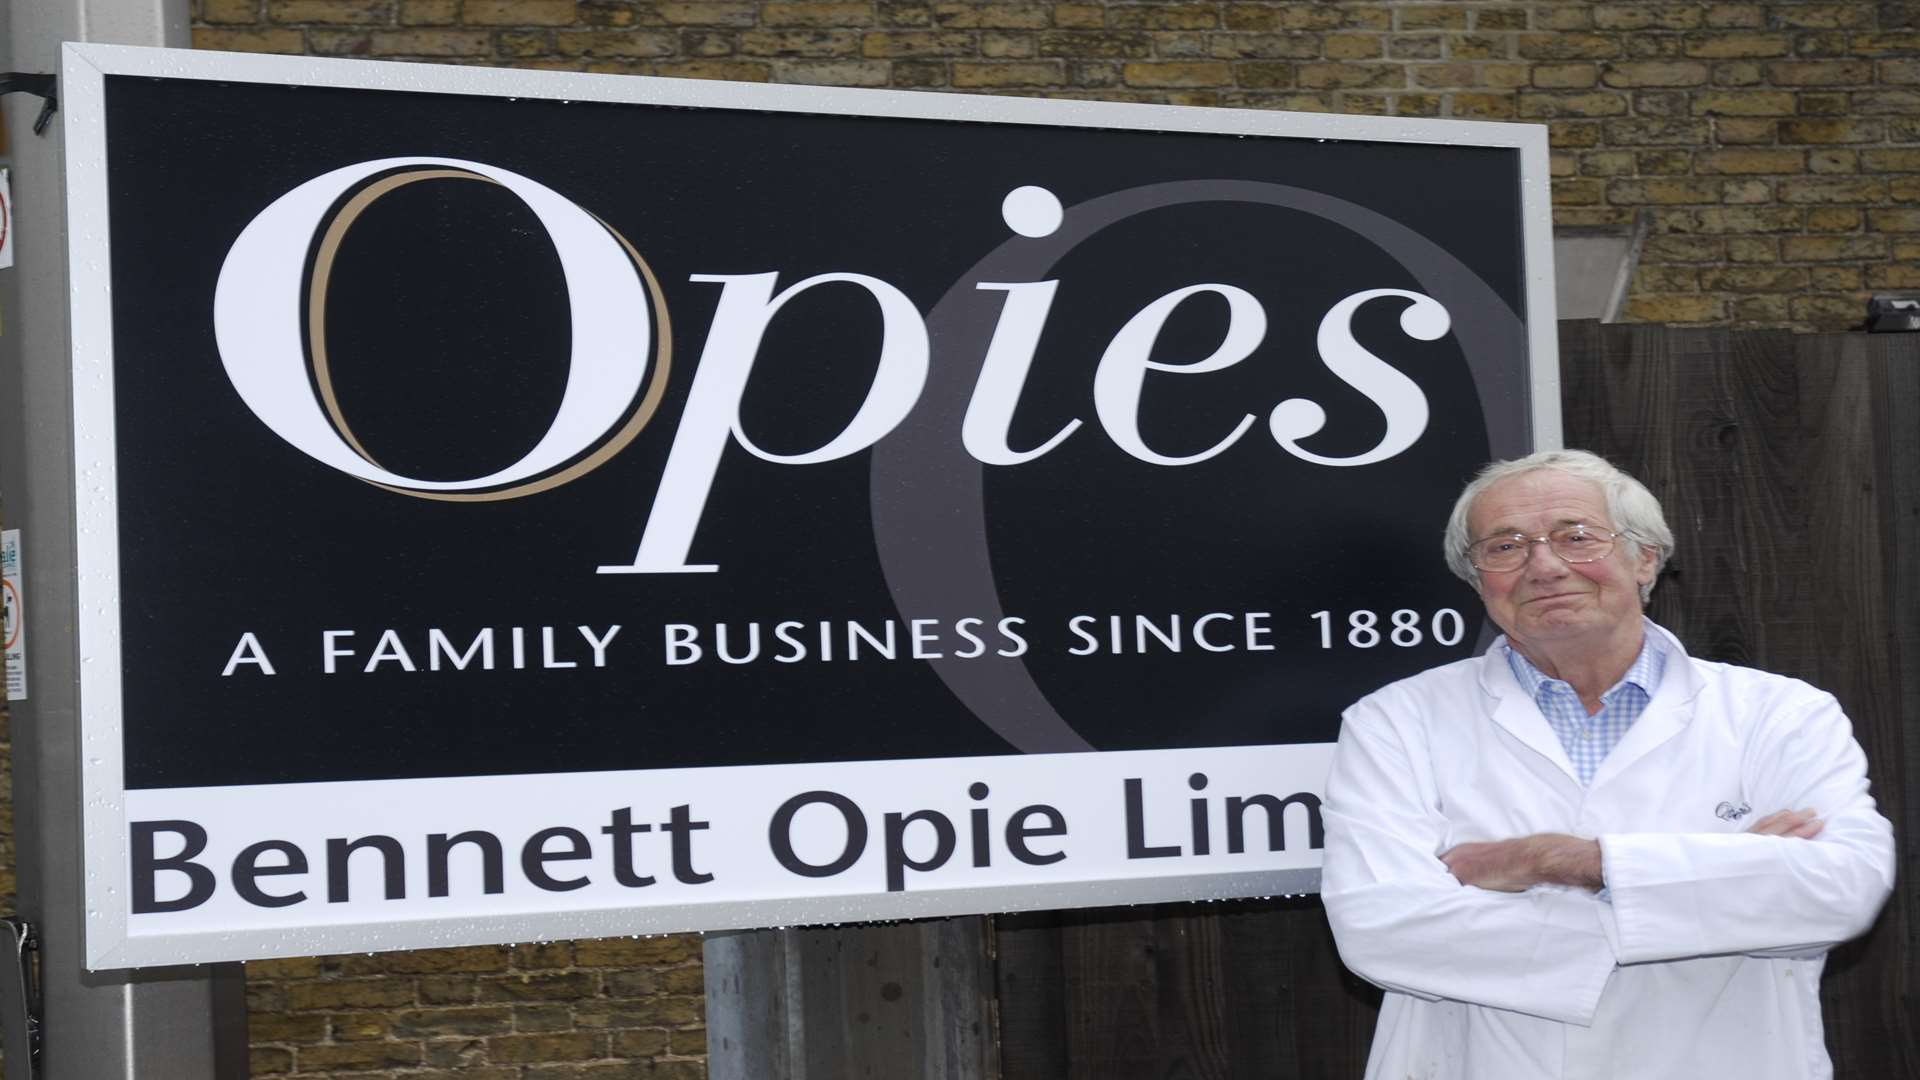 Barry Norman at Opies in Sittingbourne